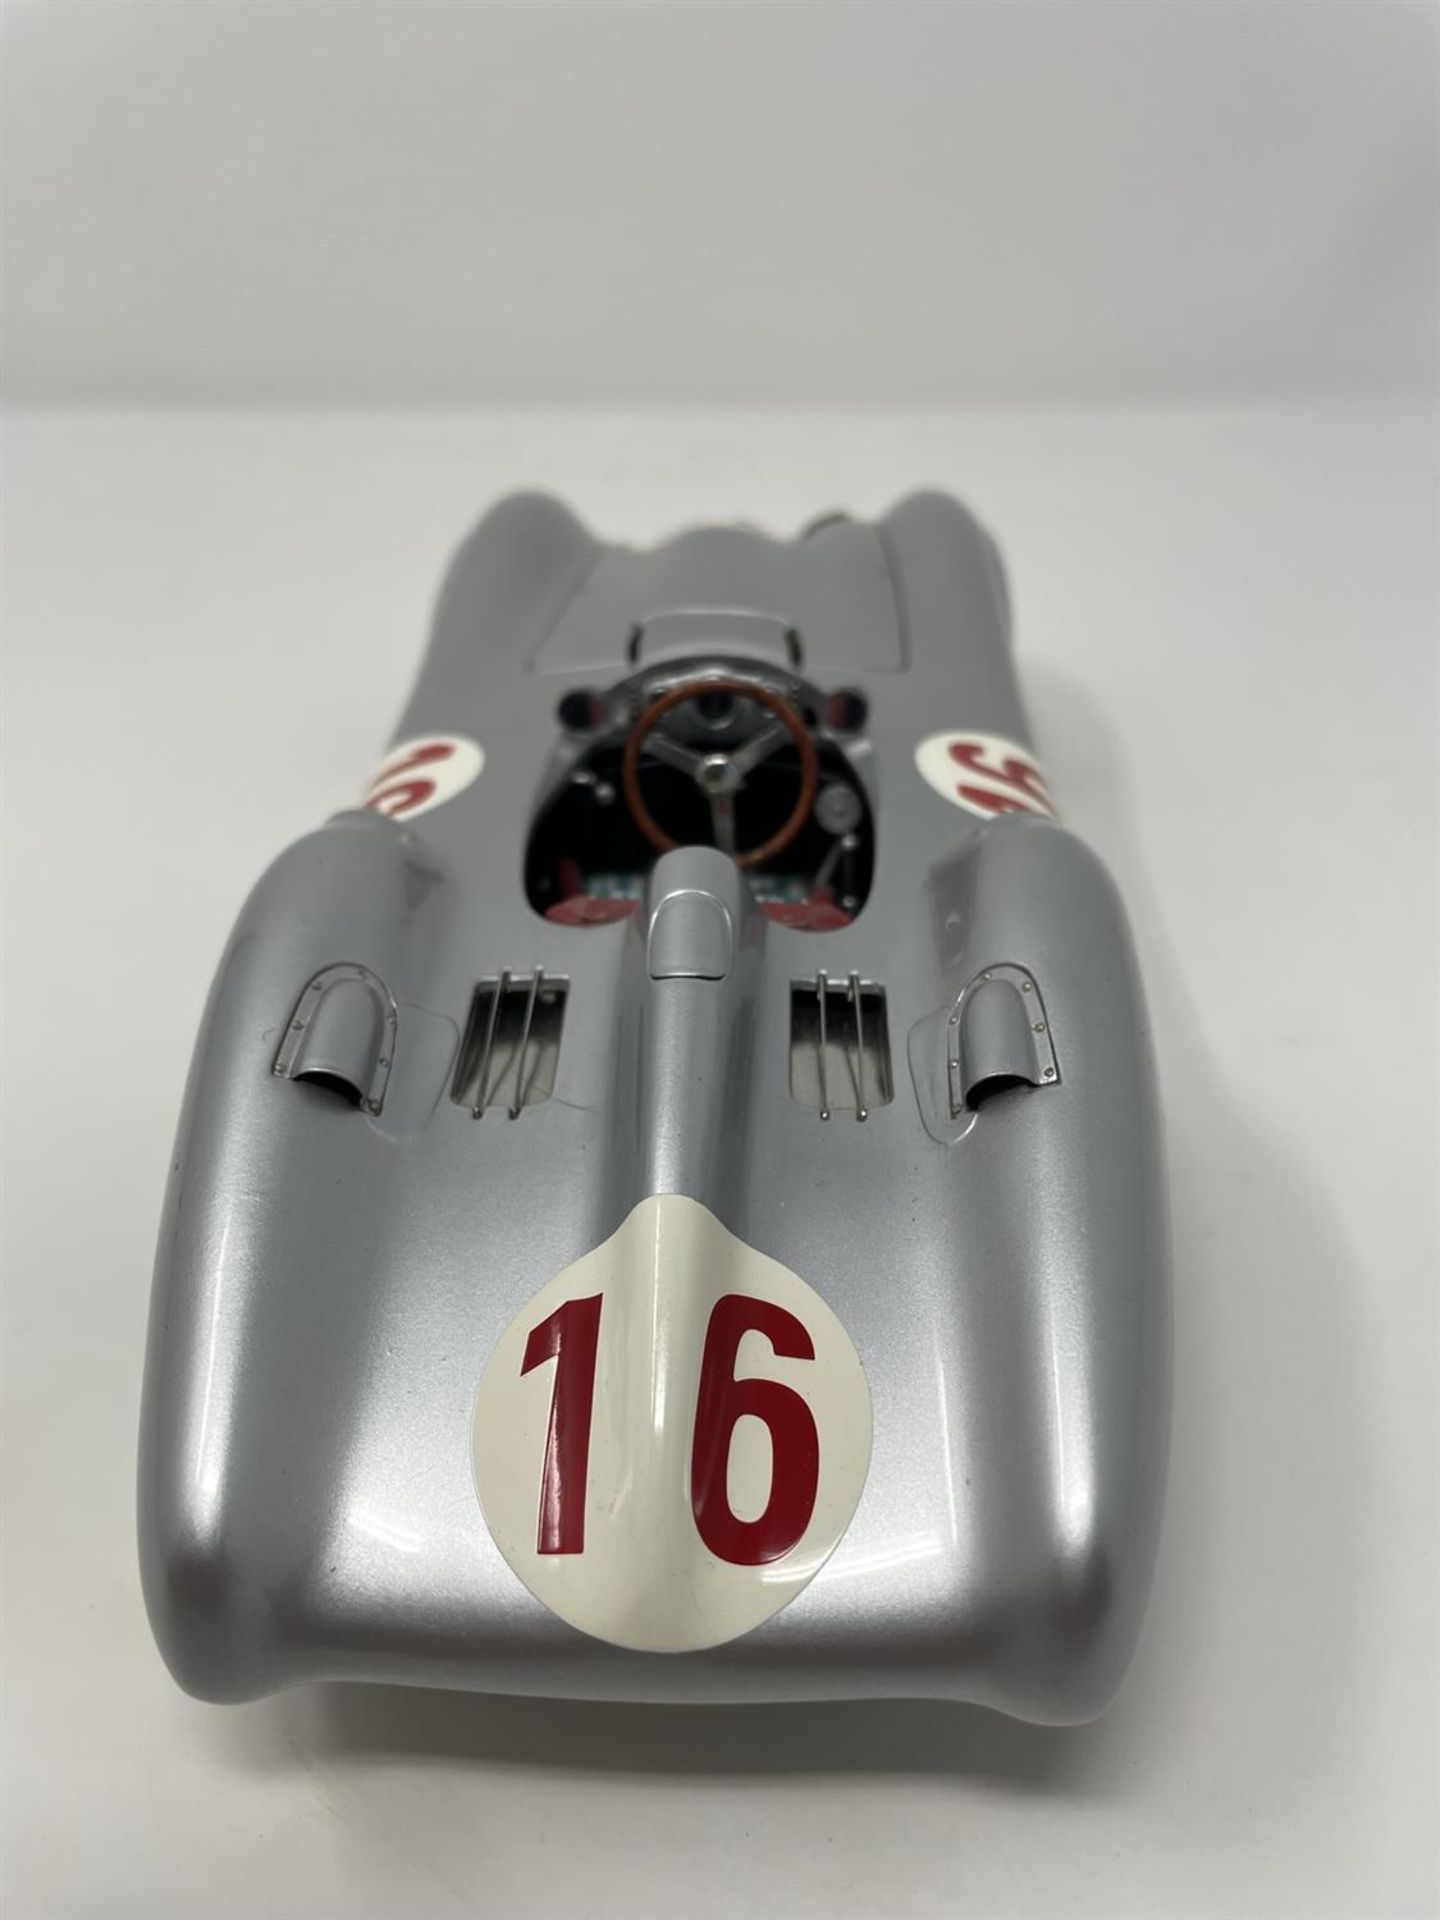 CMC 1954/55 Mercedes-Benz W196R Streamliner Body 1:18th Scale Model - Image 4 of 10